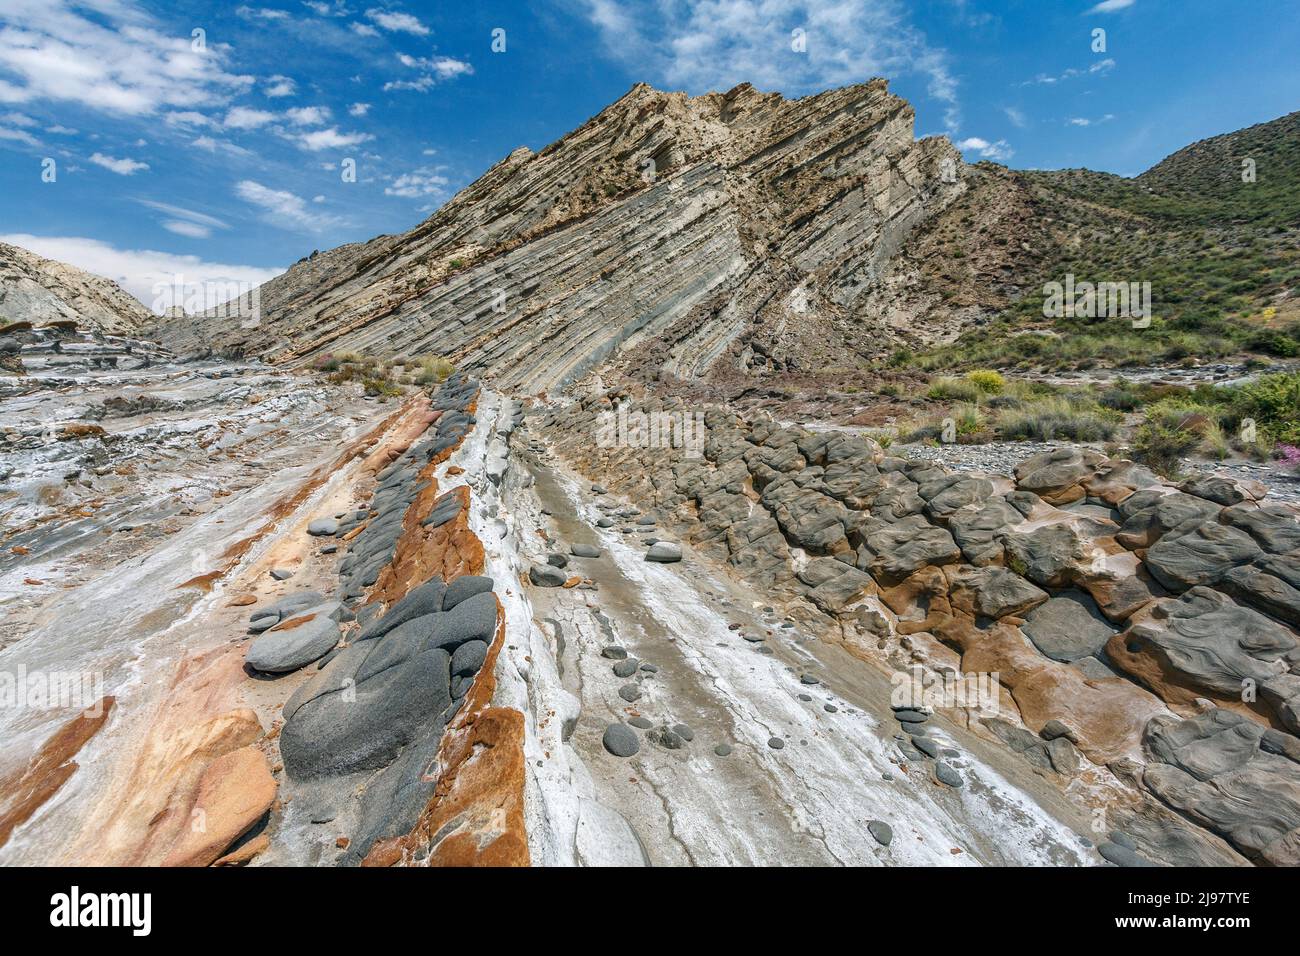 Geological layers at Tabernas desert, Almeria province, Andalusia, Spain Stock Photo